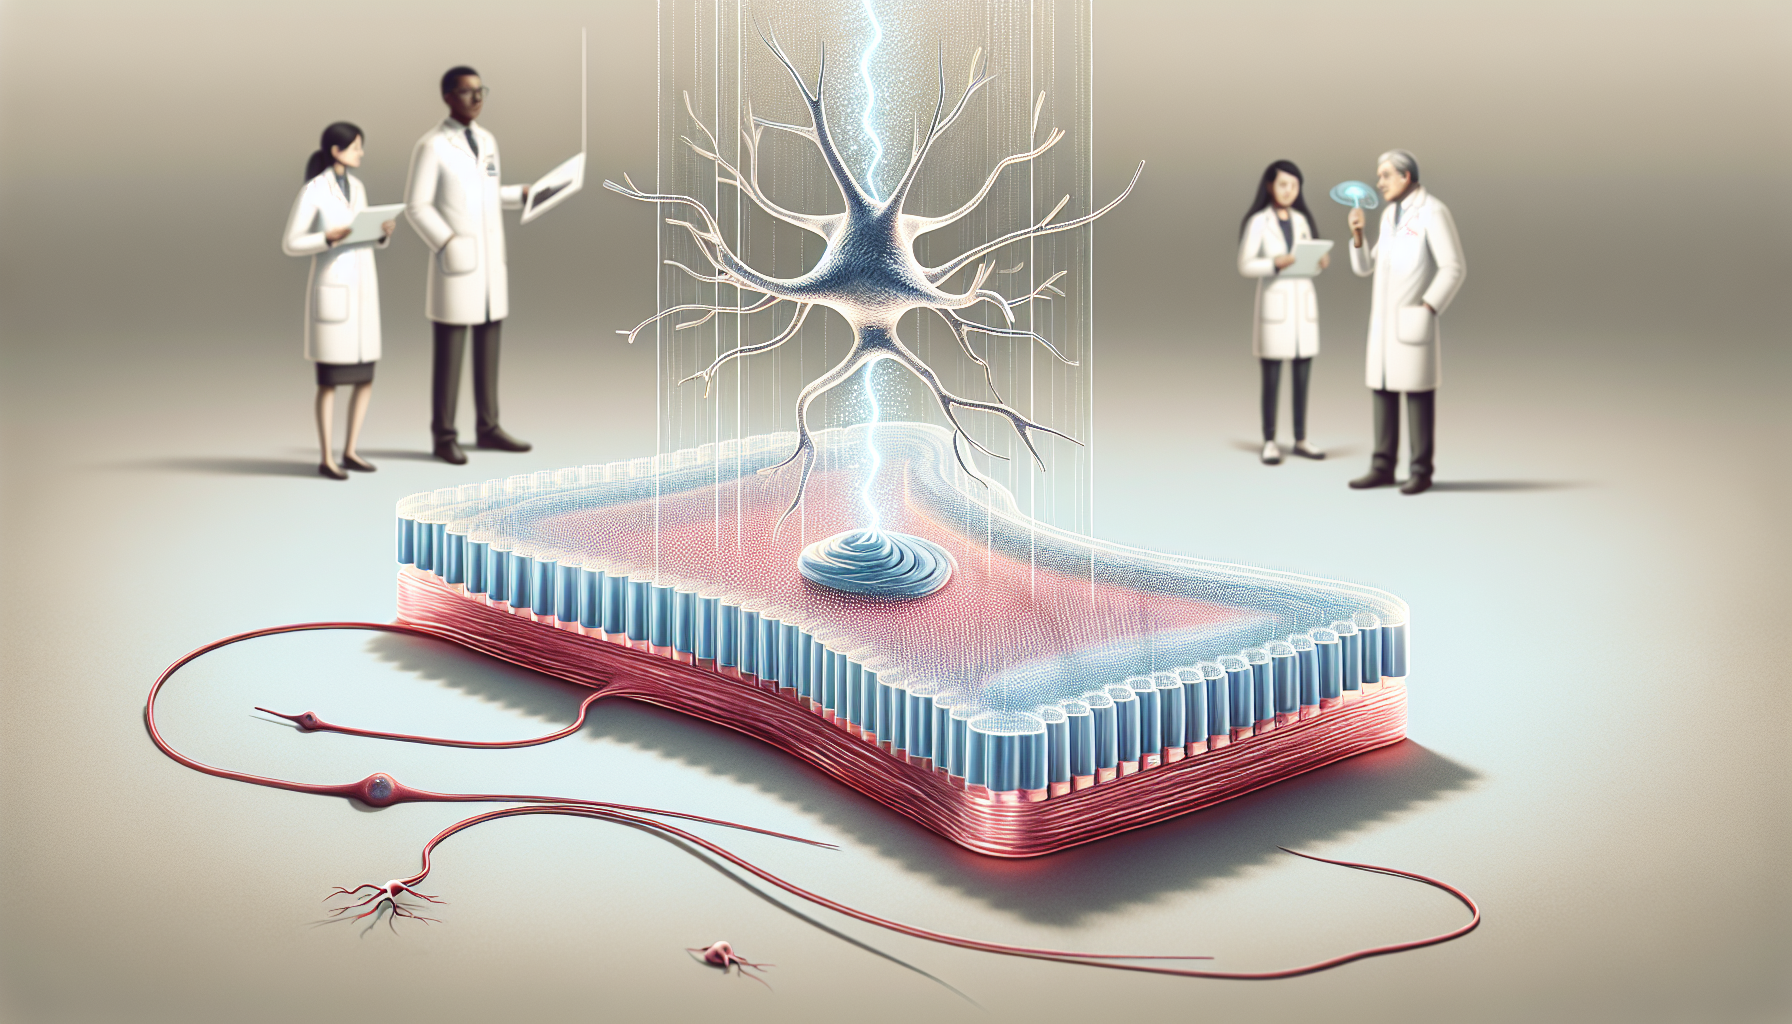 Magnetoelectric Material Allows for Least Invasive Neuron Stimulation